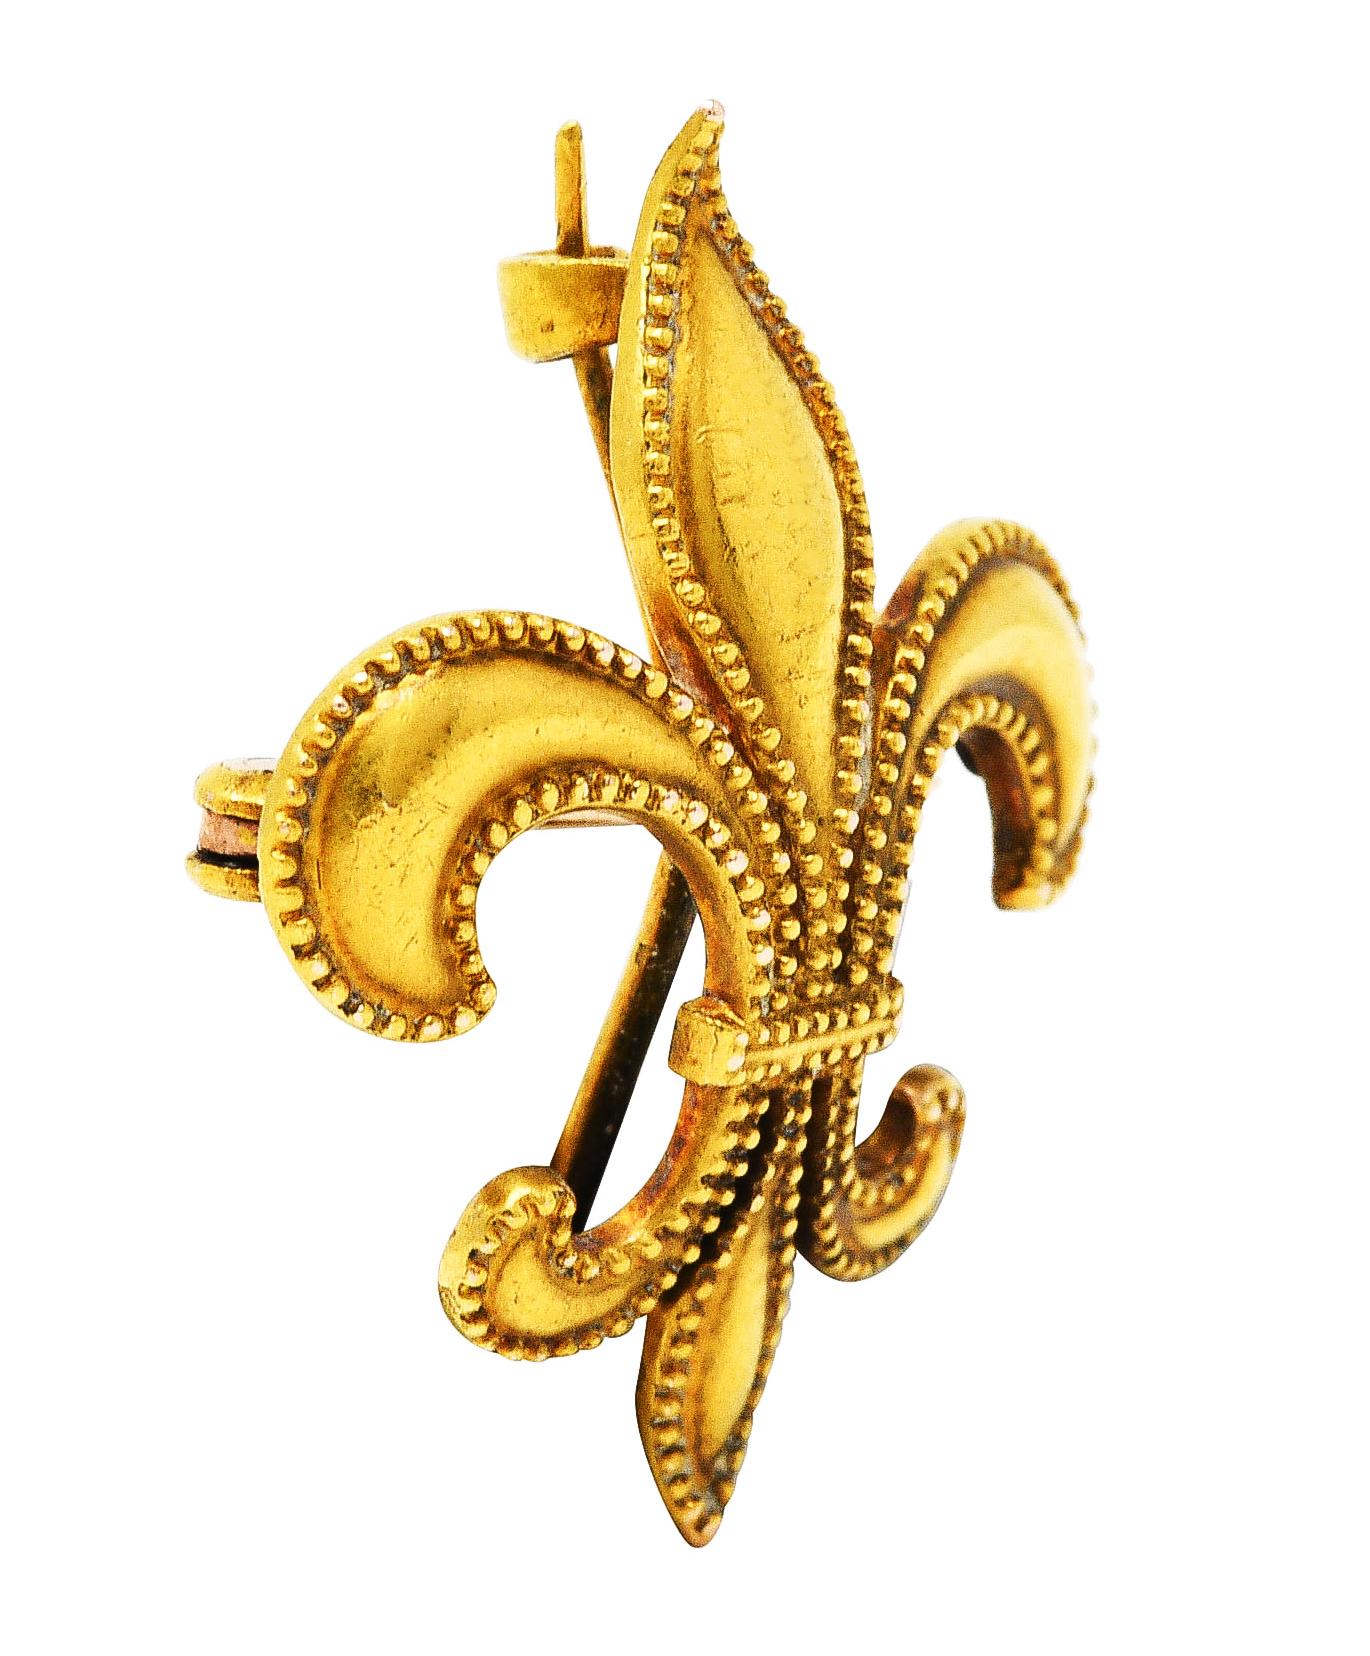 Pendant brooch designed as stylized whiplash fleur-de-lis symbol

Featuring milgrain edges

Completed by hinged pin stem and looping bale - perfect for optional drop, watch or locket

Stamped 14k for 14 karat gold

With maker's mark

Circa: